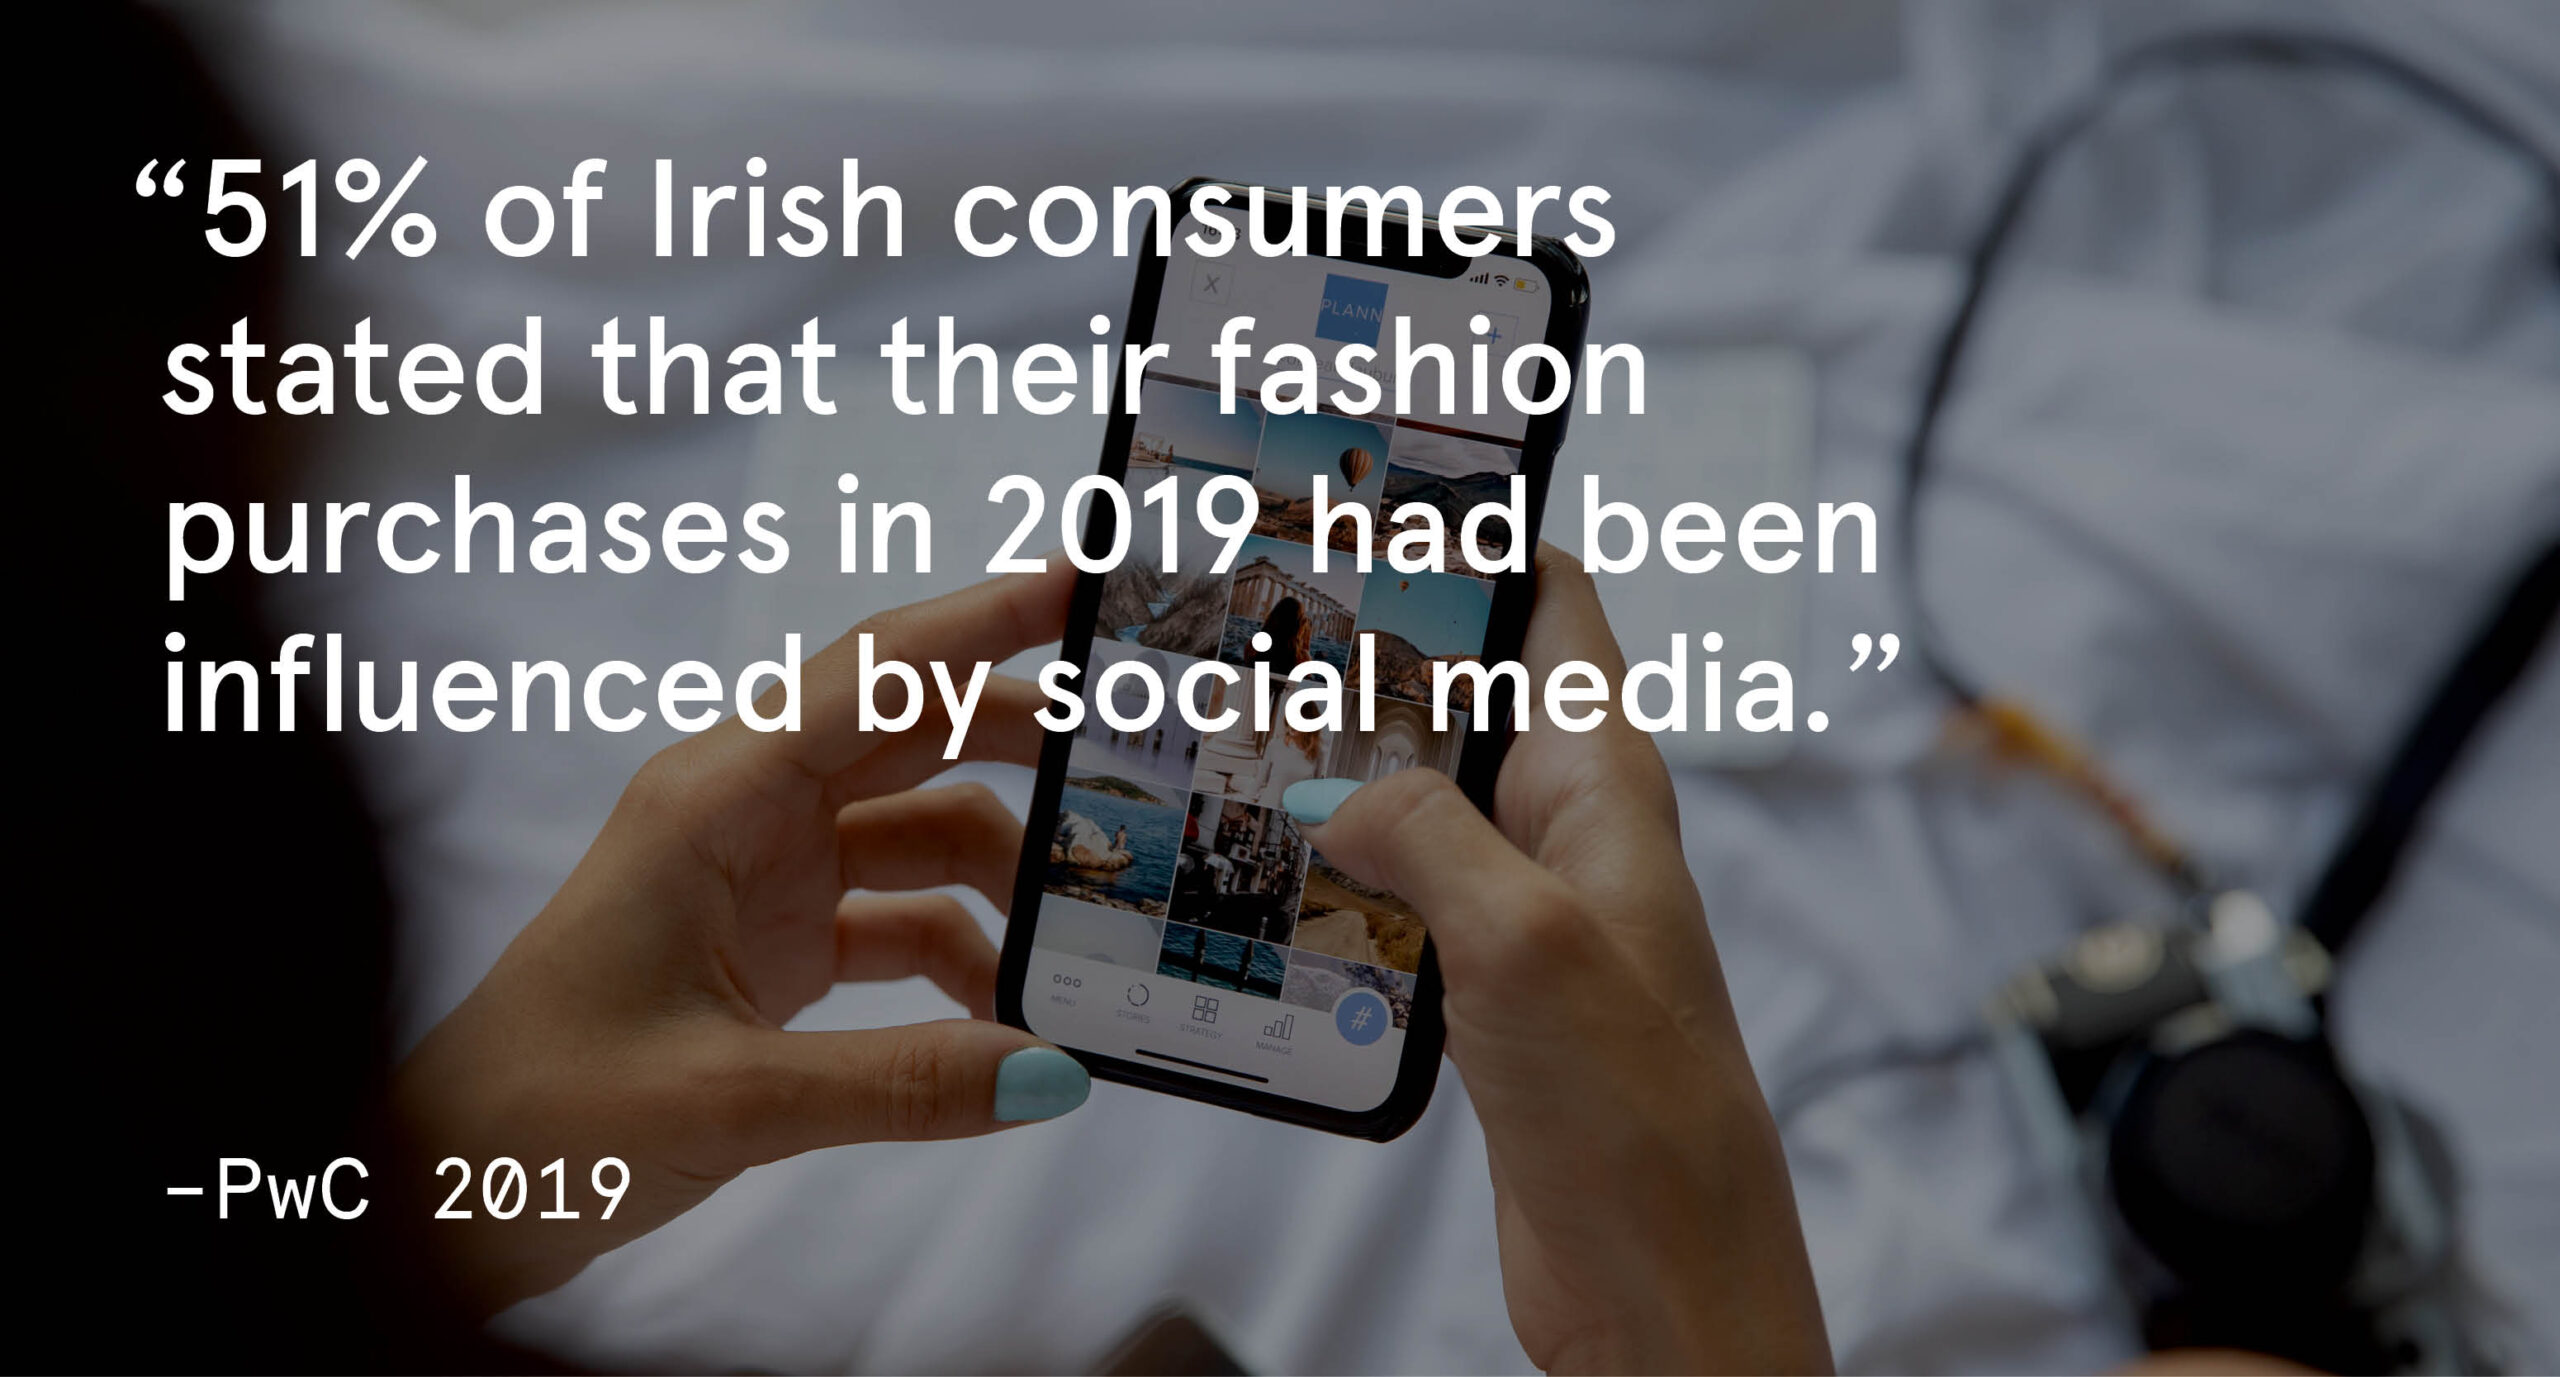 51% of Irish consumers stated that their fashion purchases in 2019 had been influenced by social media.